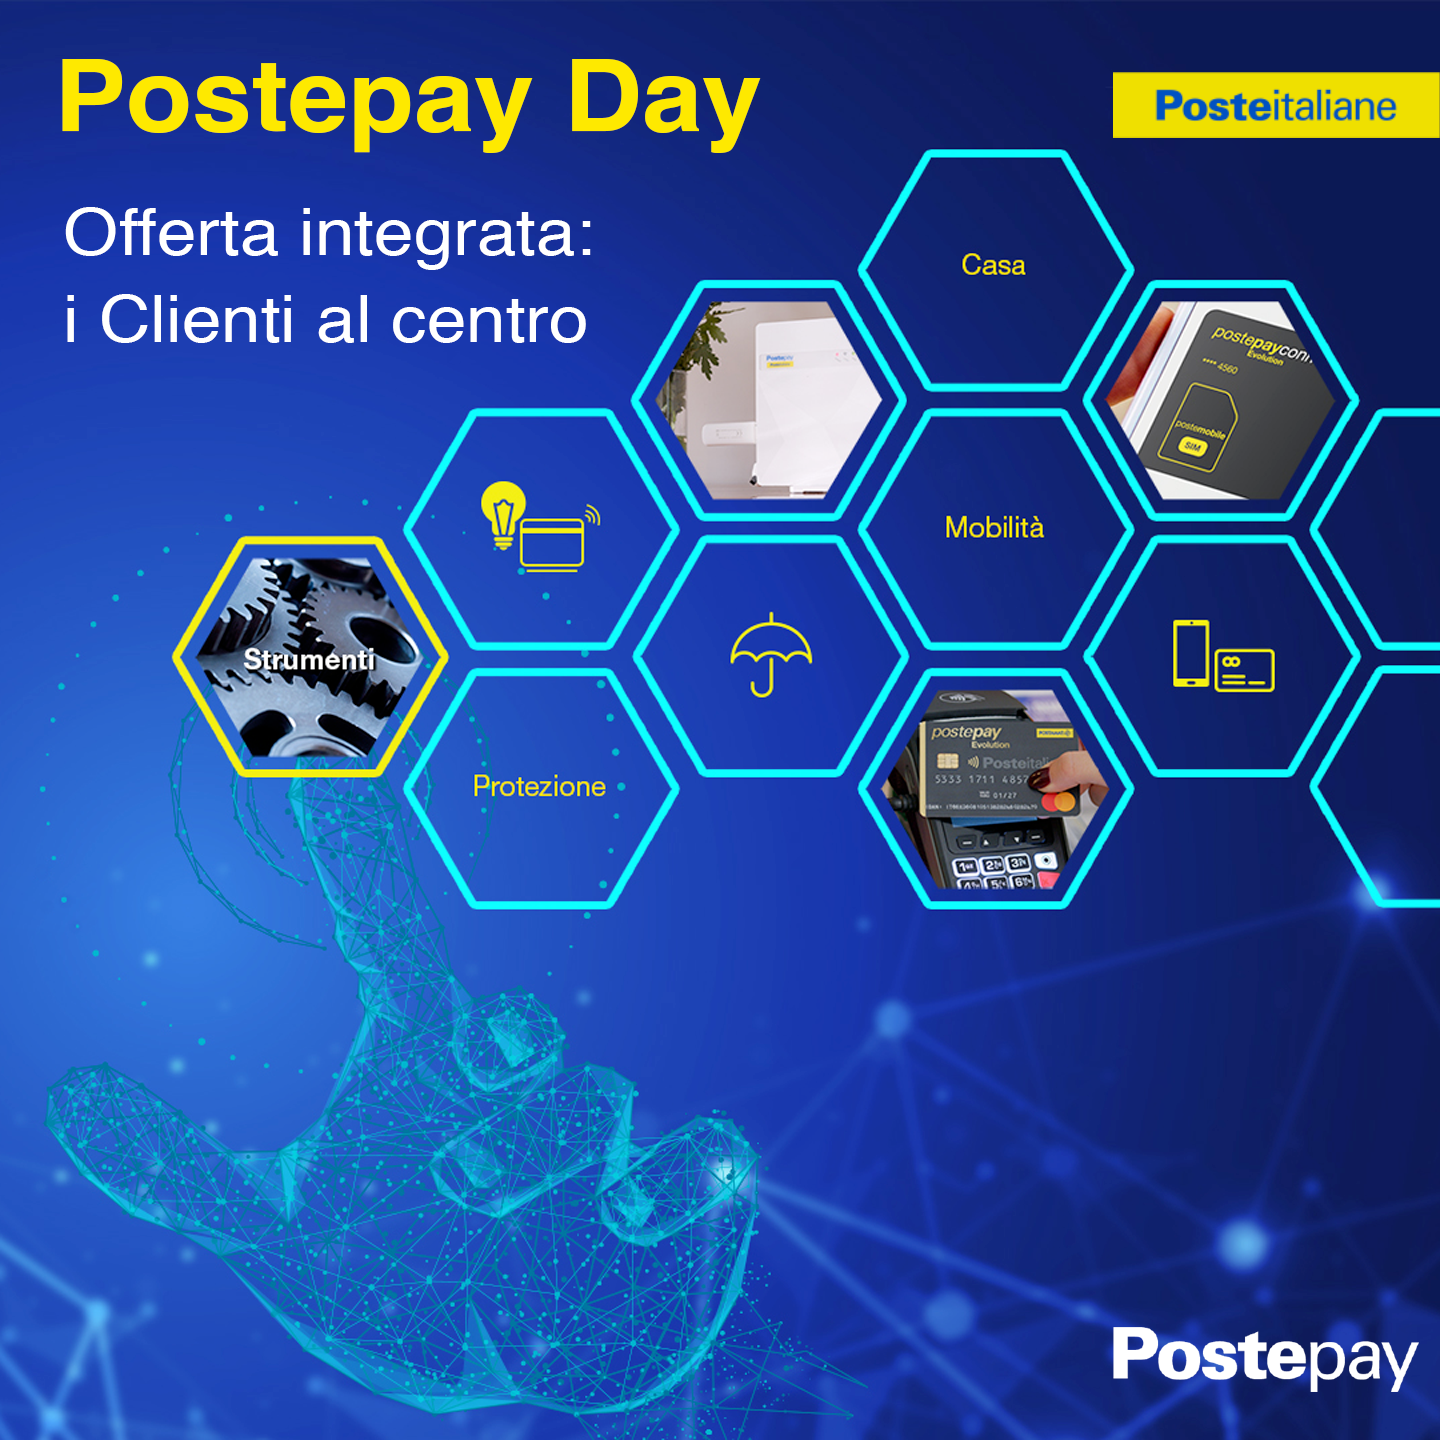 Postepay Day